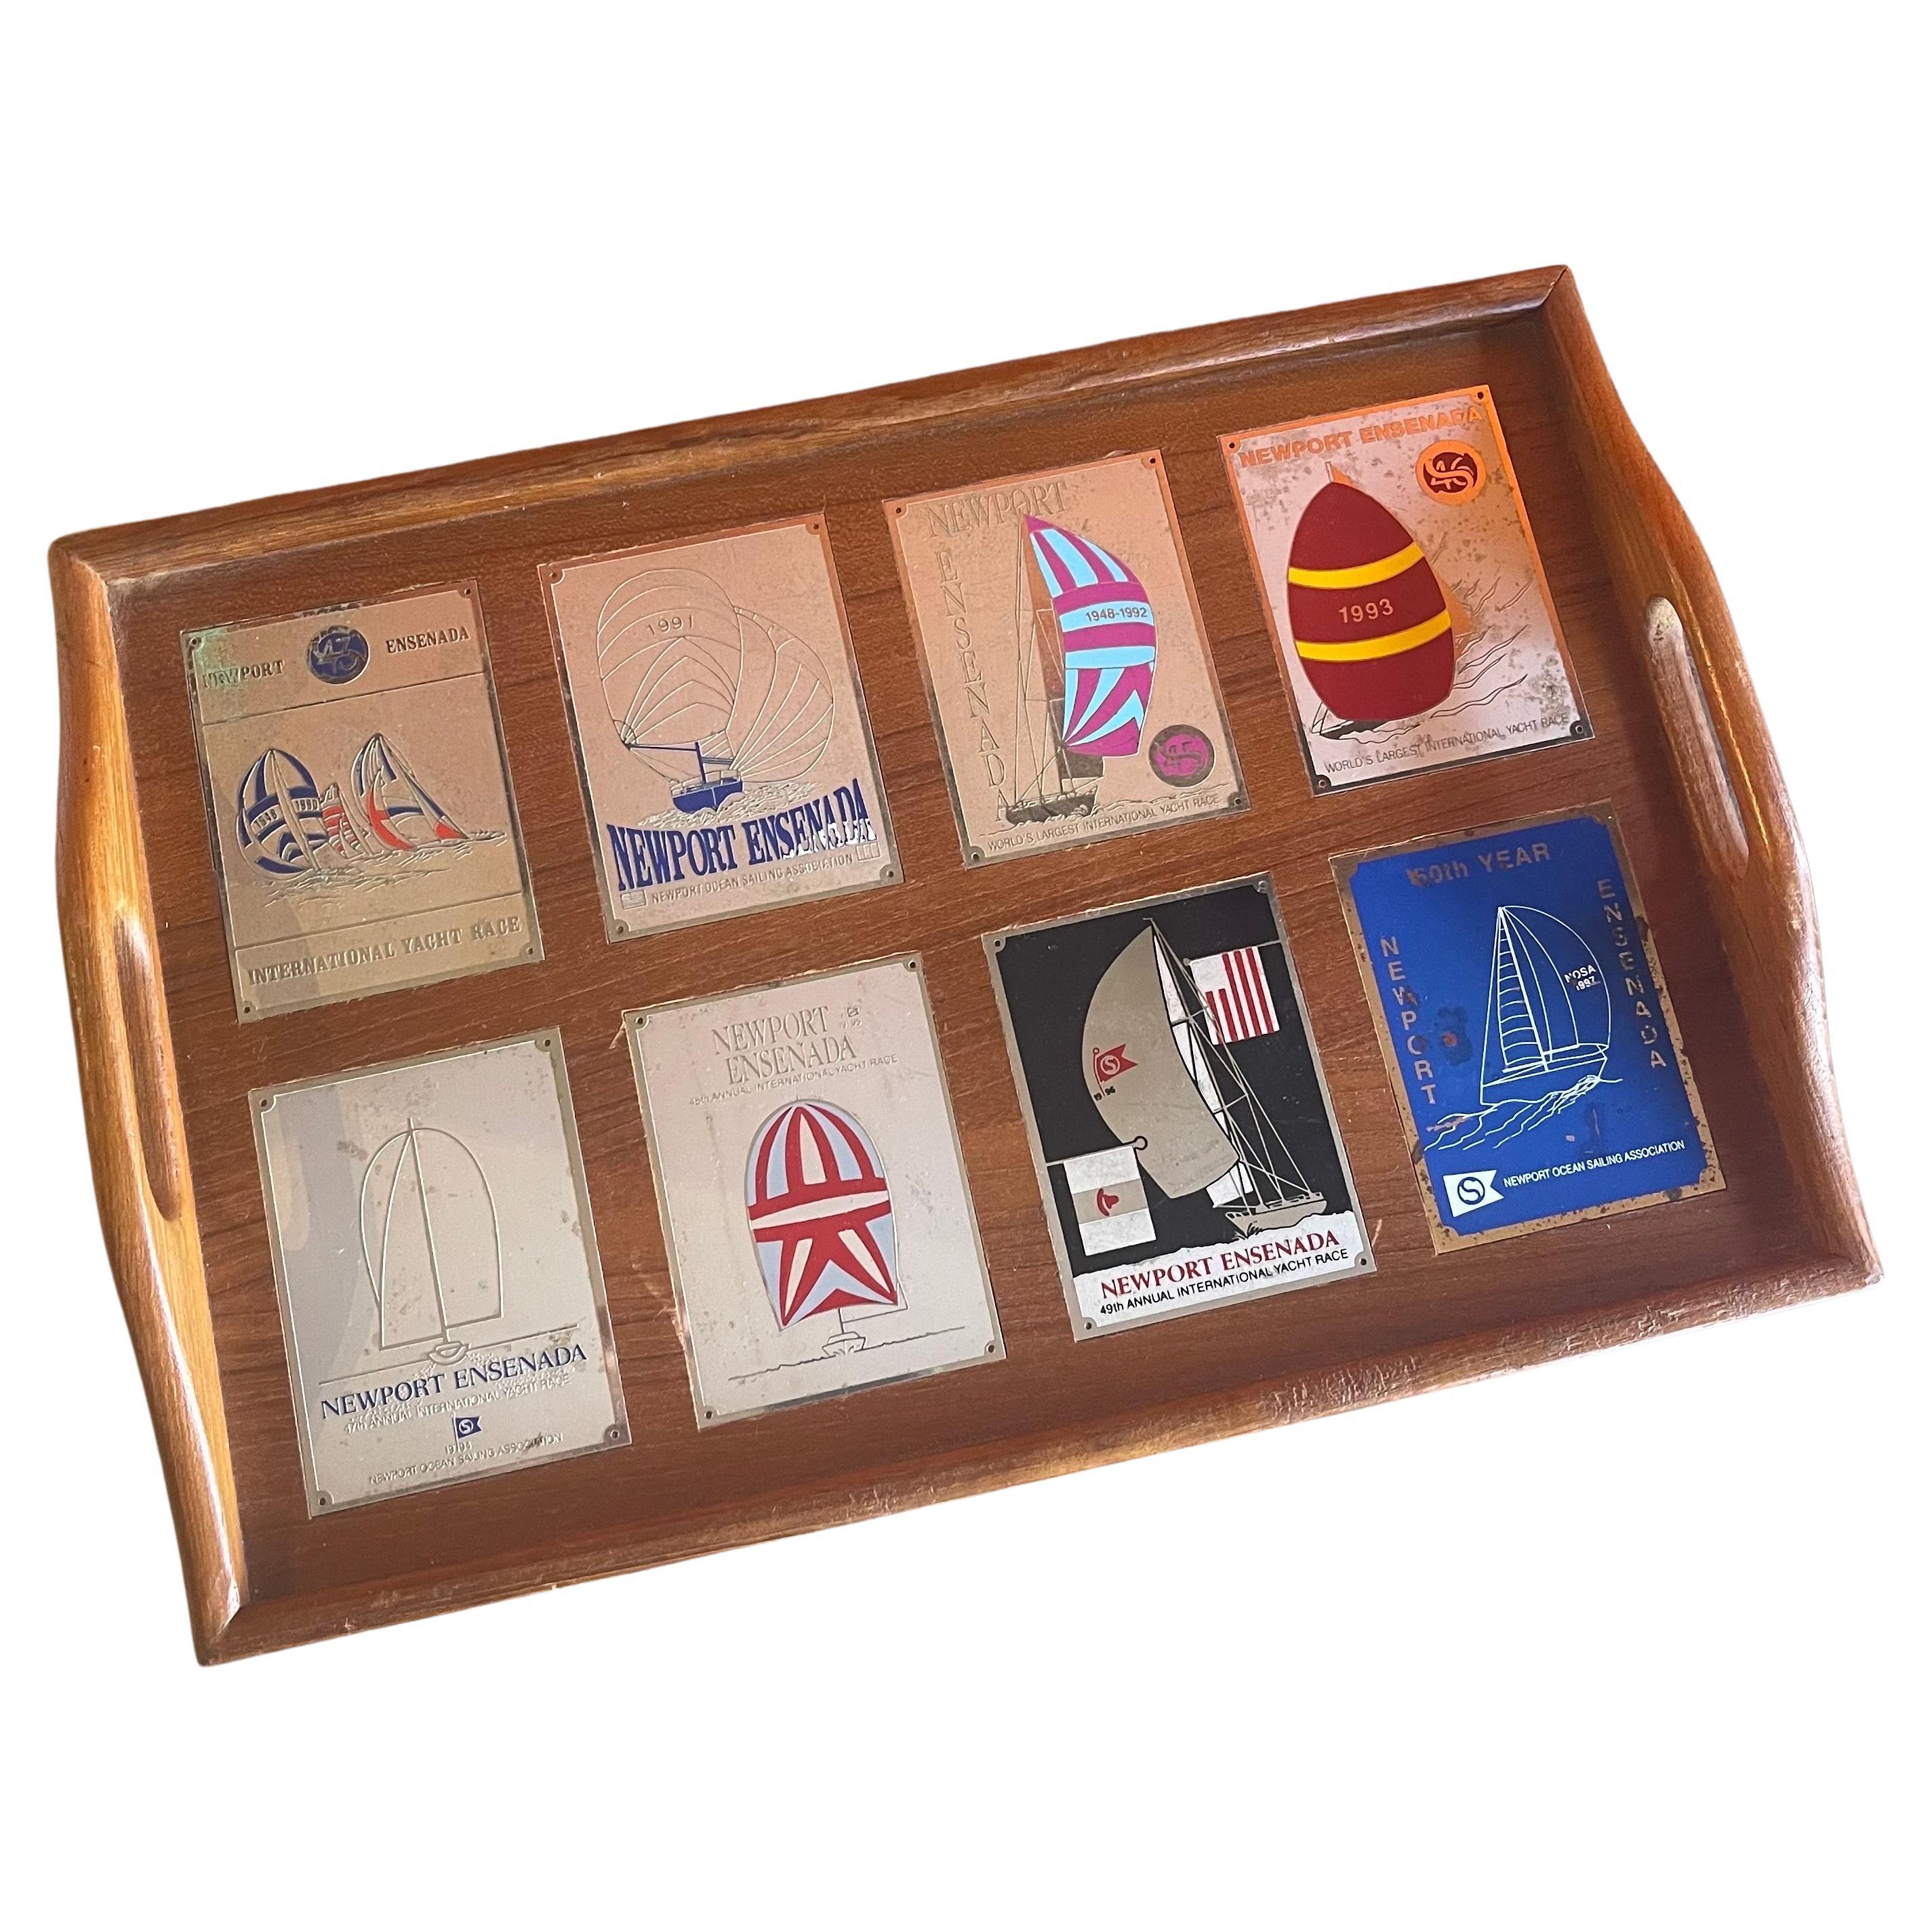 Vintage Teak Tray with Embedded "Newport Beach to Ensenada" Yacht Race Emblems For Sale